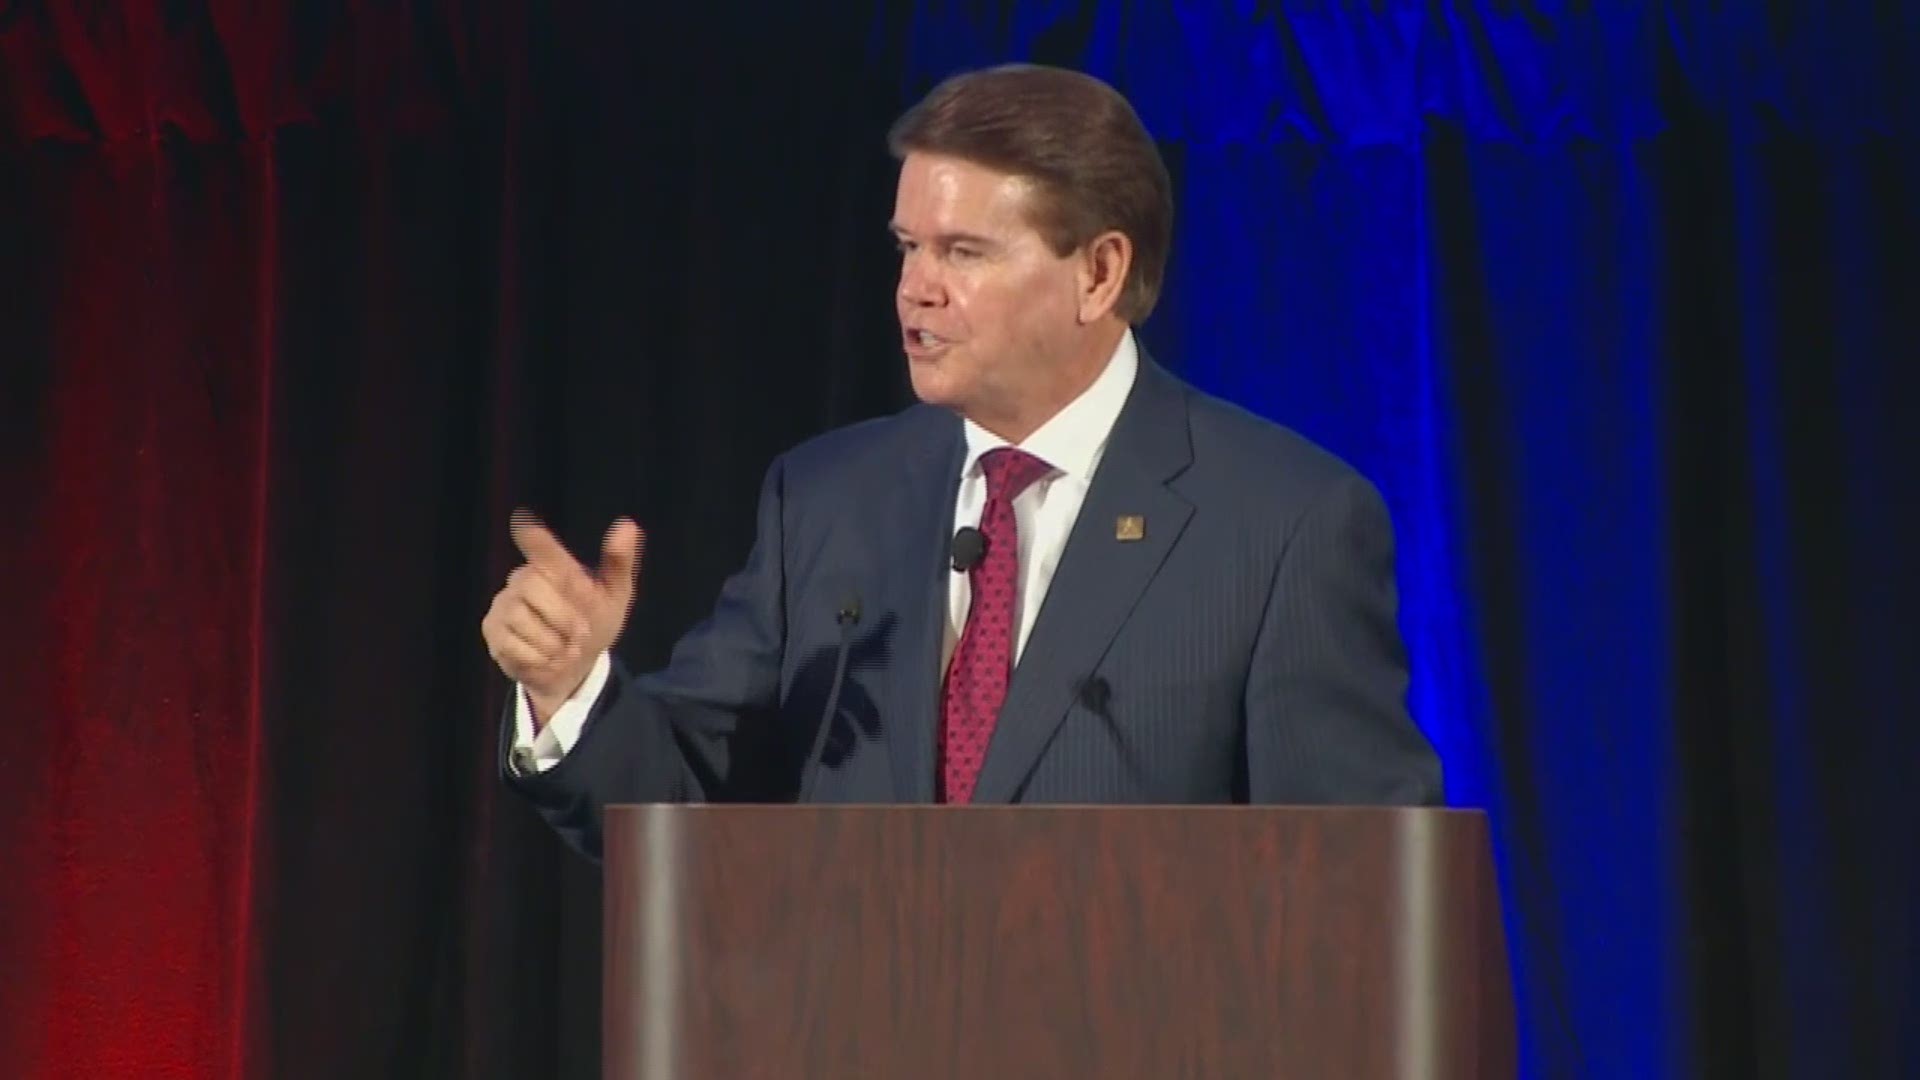 Arlington mayor Jeff Williams spoke at a luncheon just hours after it was announced that AT&T Stadium would host the 2018 NFL Draft.